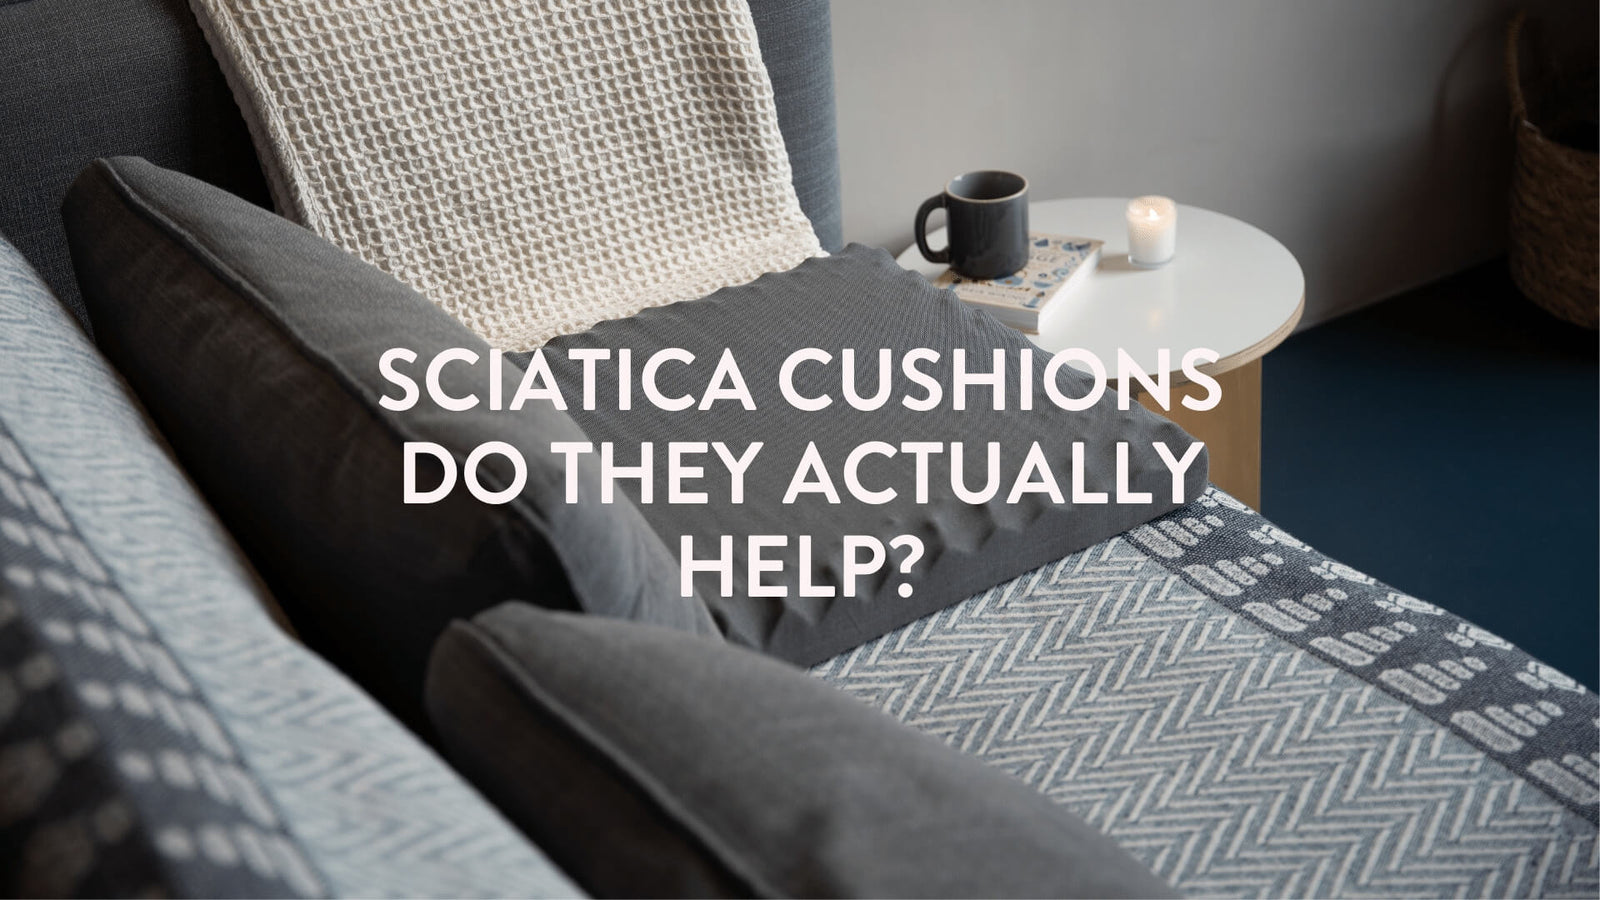 Sciatica Cushions - Do they actually help?